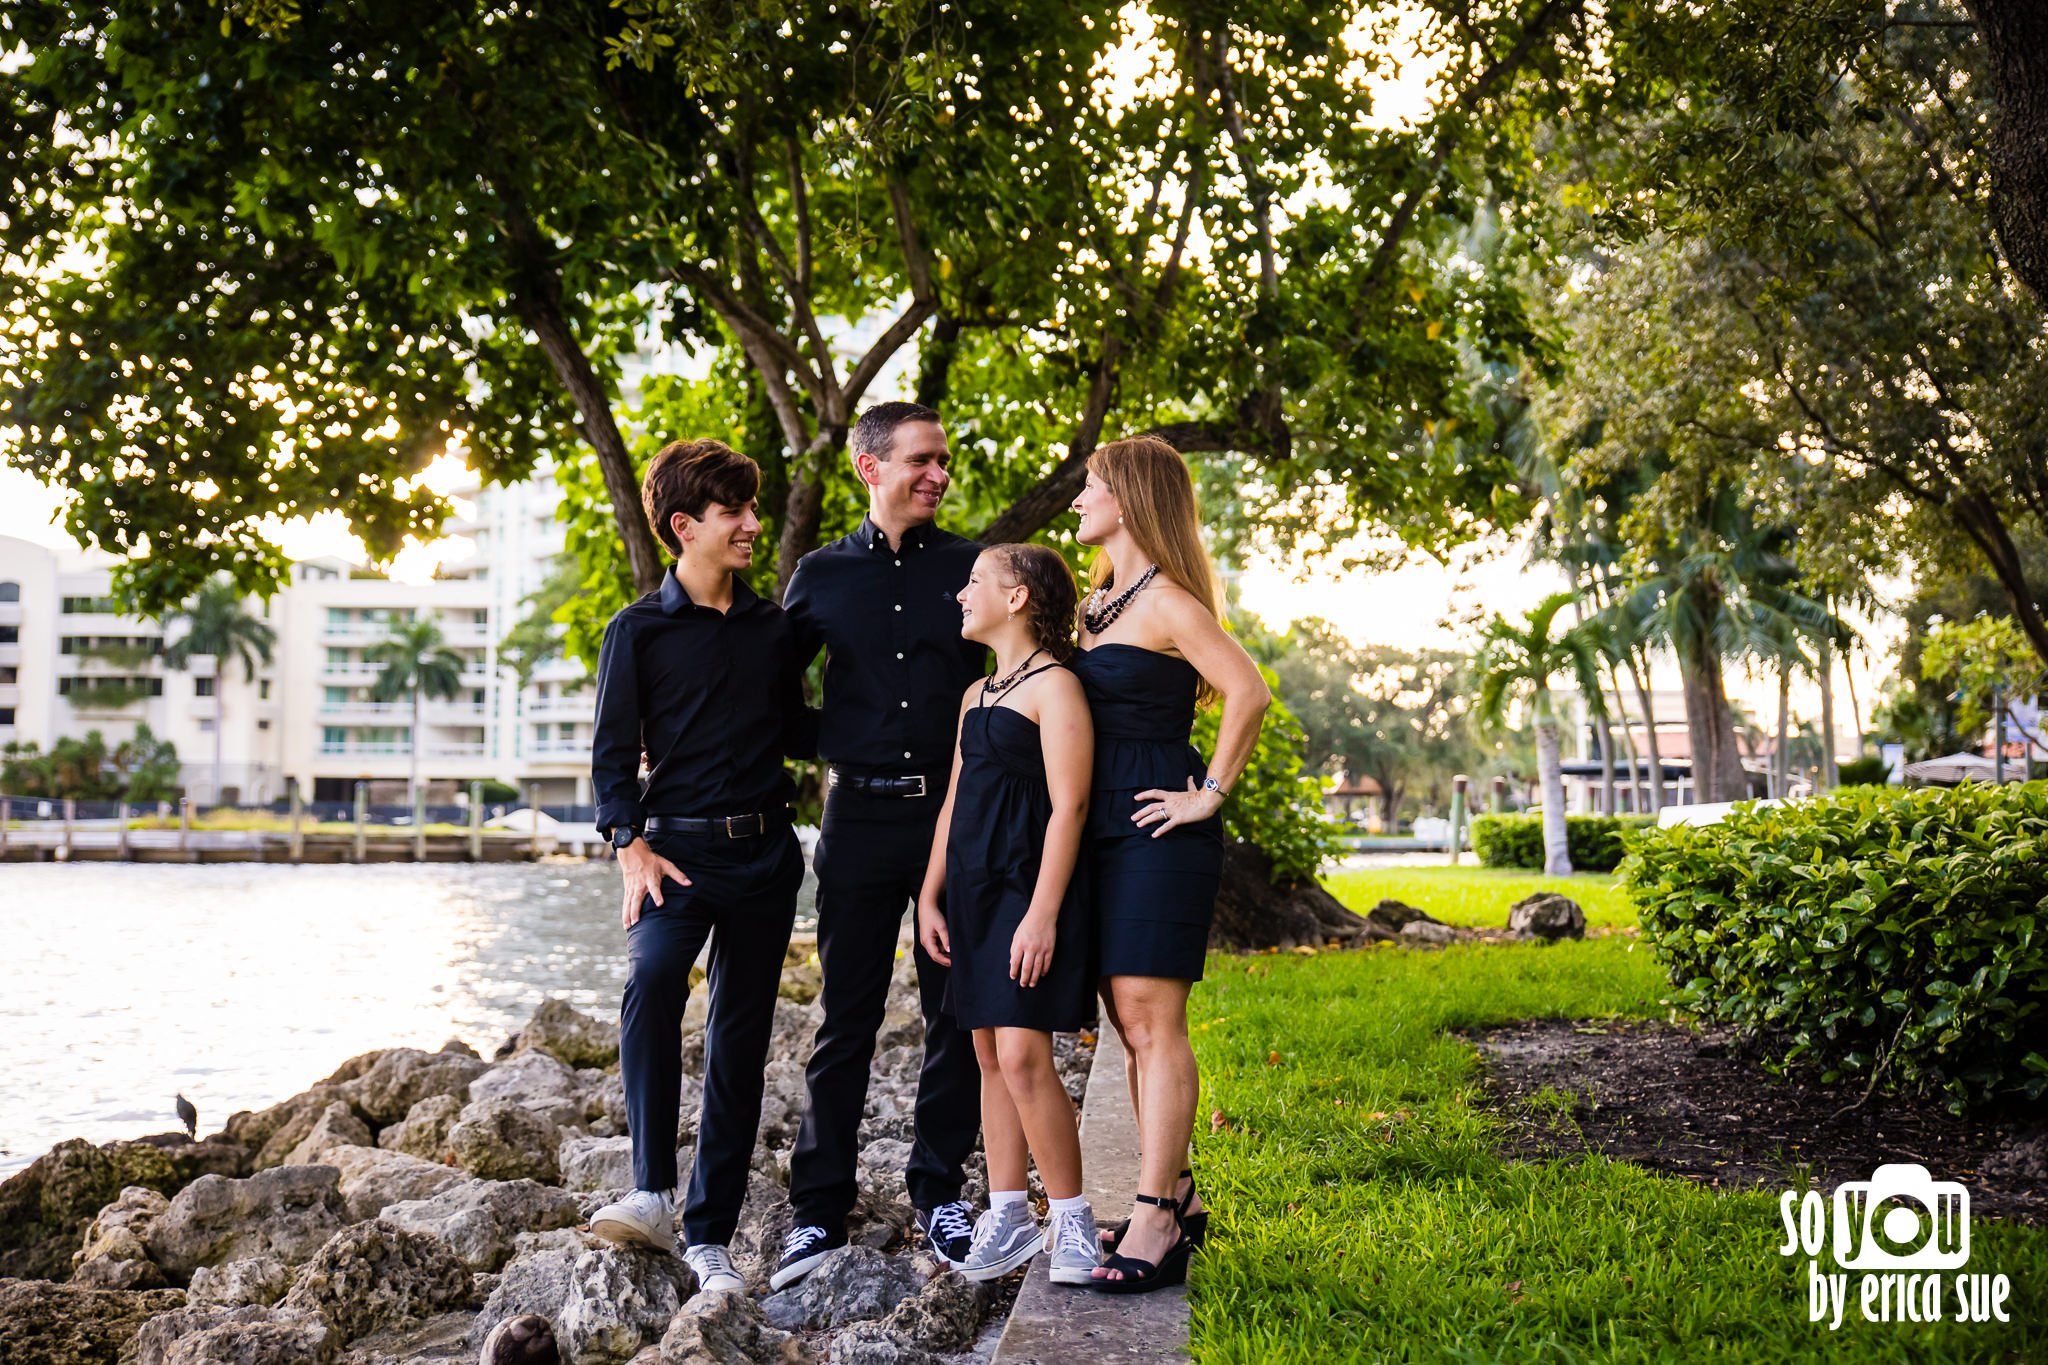 6-riverwalk-ft-lauderdale-lifestyle-family-photographer-so-you-by-erica-sue-ES1_3757.JPG